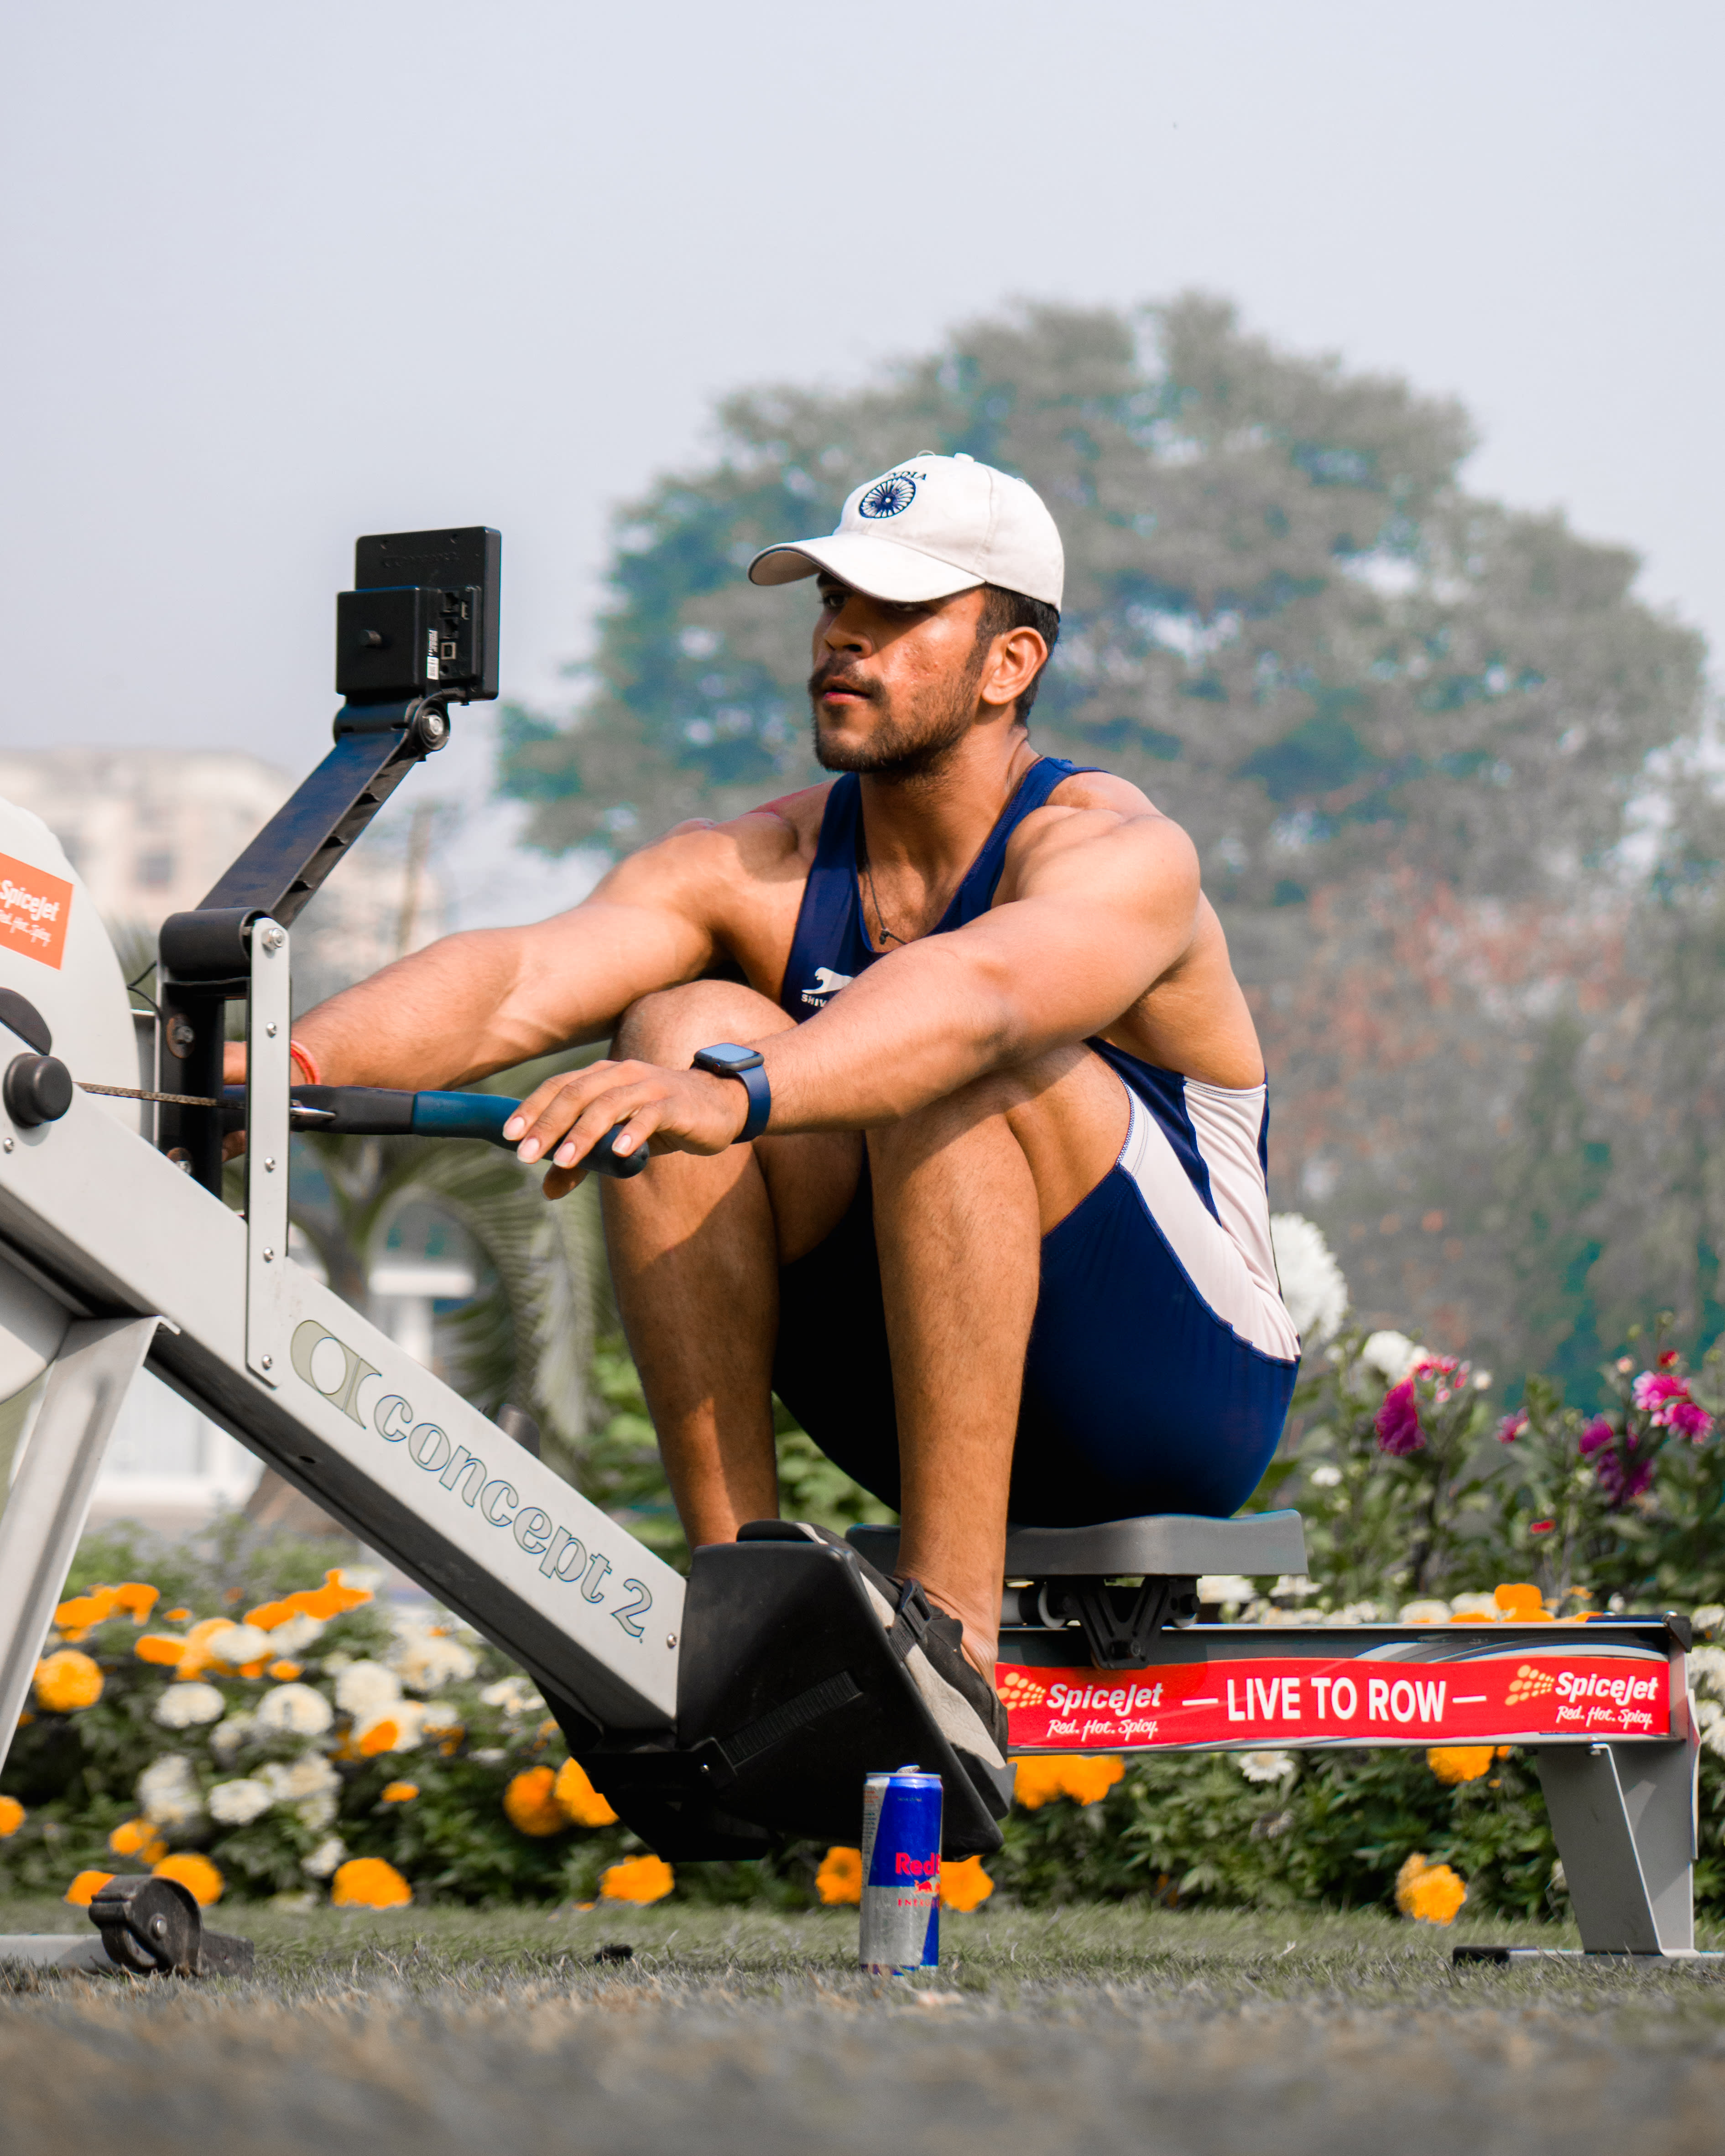 Rowing fitness: Full-body workouts through rowing